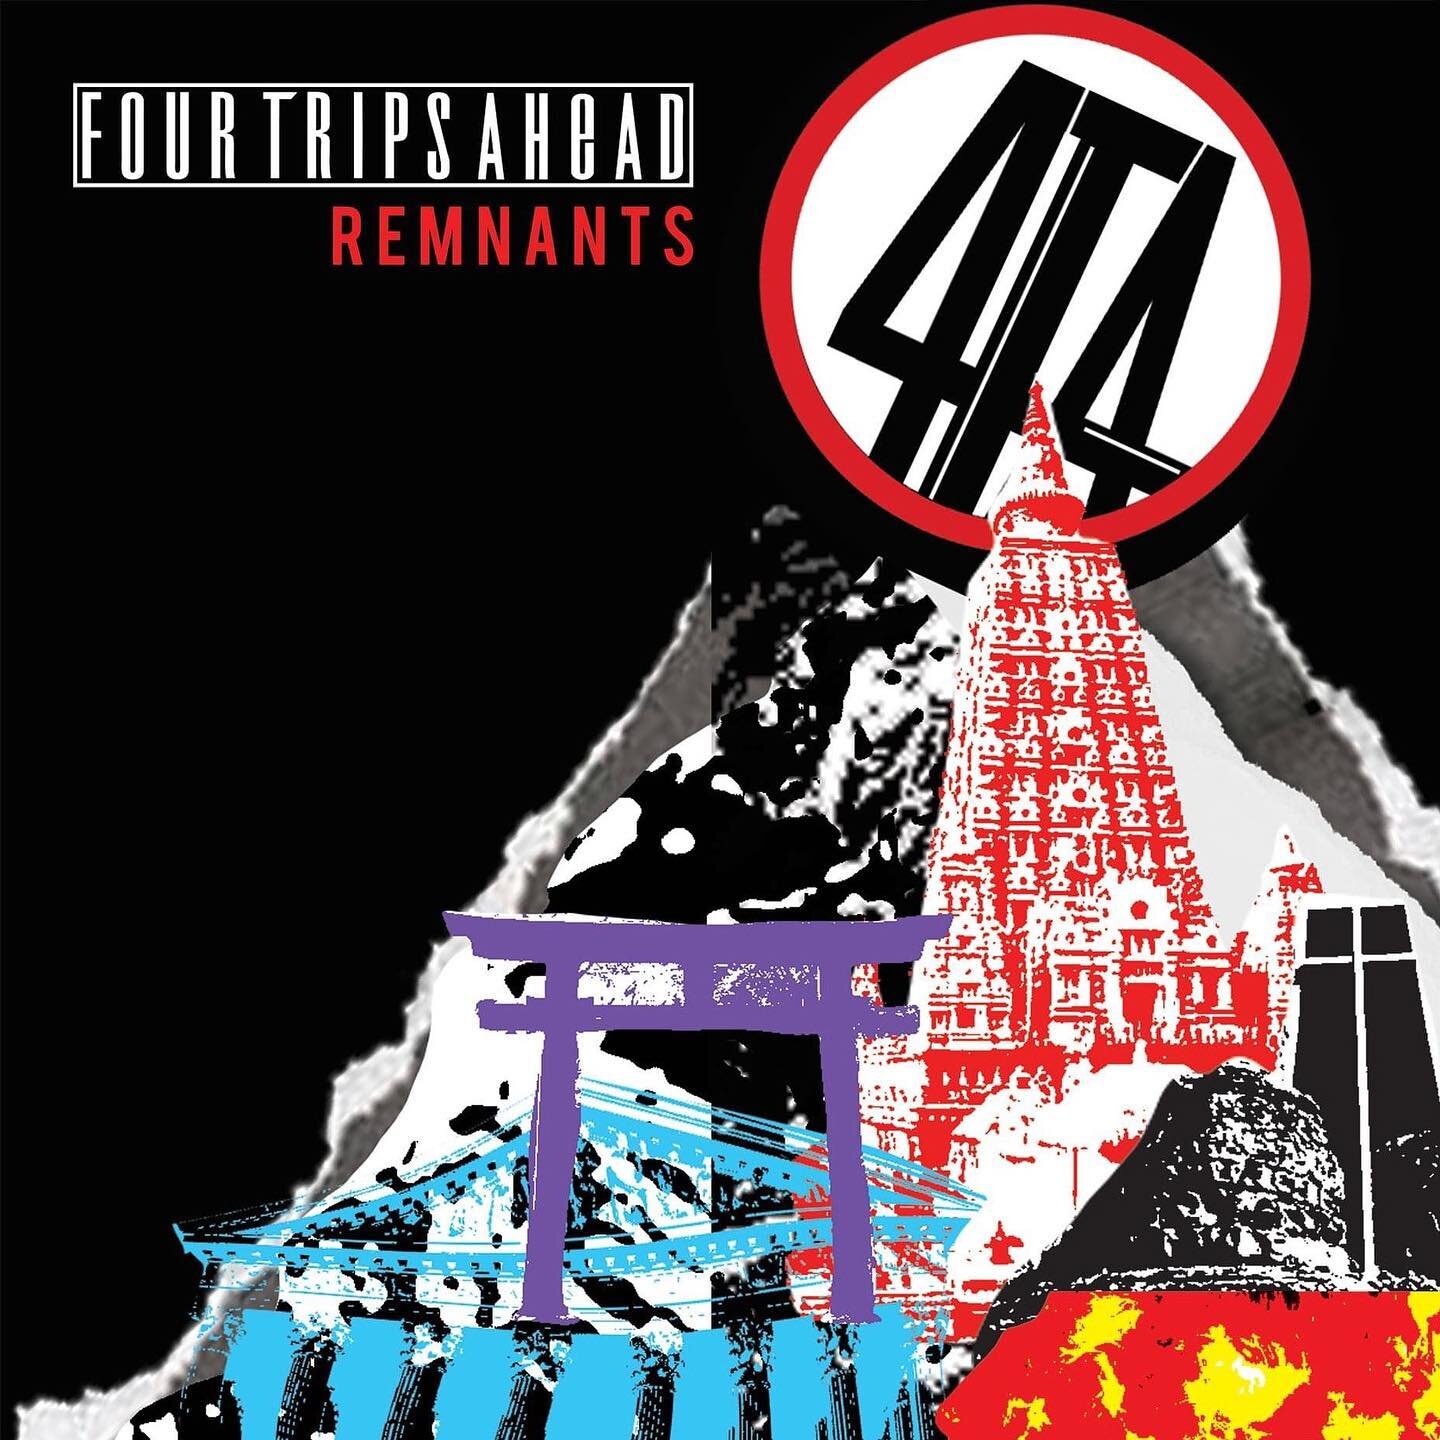 &ldquo;No silence
The day is never done
The system&rsquo;s not working
It ain&rsquo;t working.&rdquo;

#Remnants #FTAOfficialLyricVideo #RemnantsEP #HeavyRock #HardRock #ProgRock #HeavyMetal #ReclaimRockMusic 

FOUR TRIPS AHEAD's lyric video for &quo